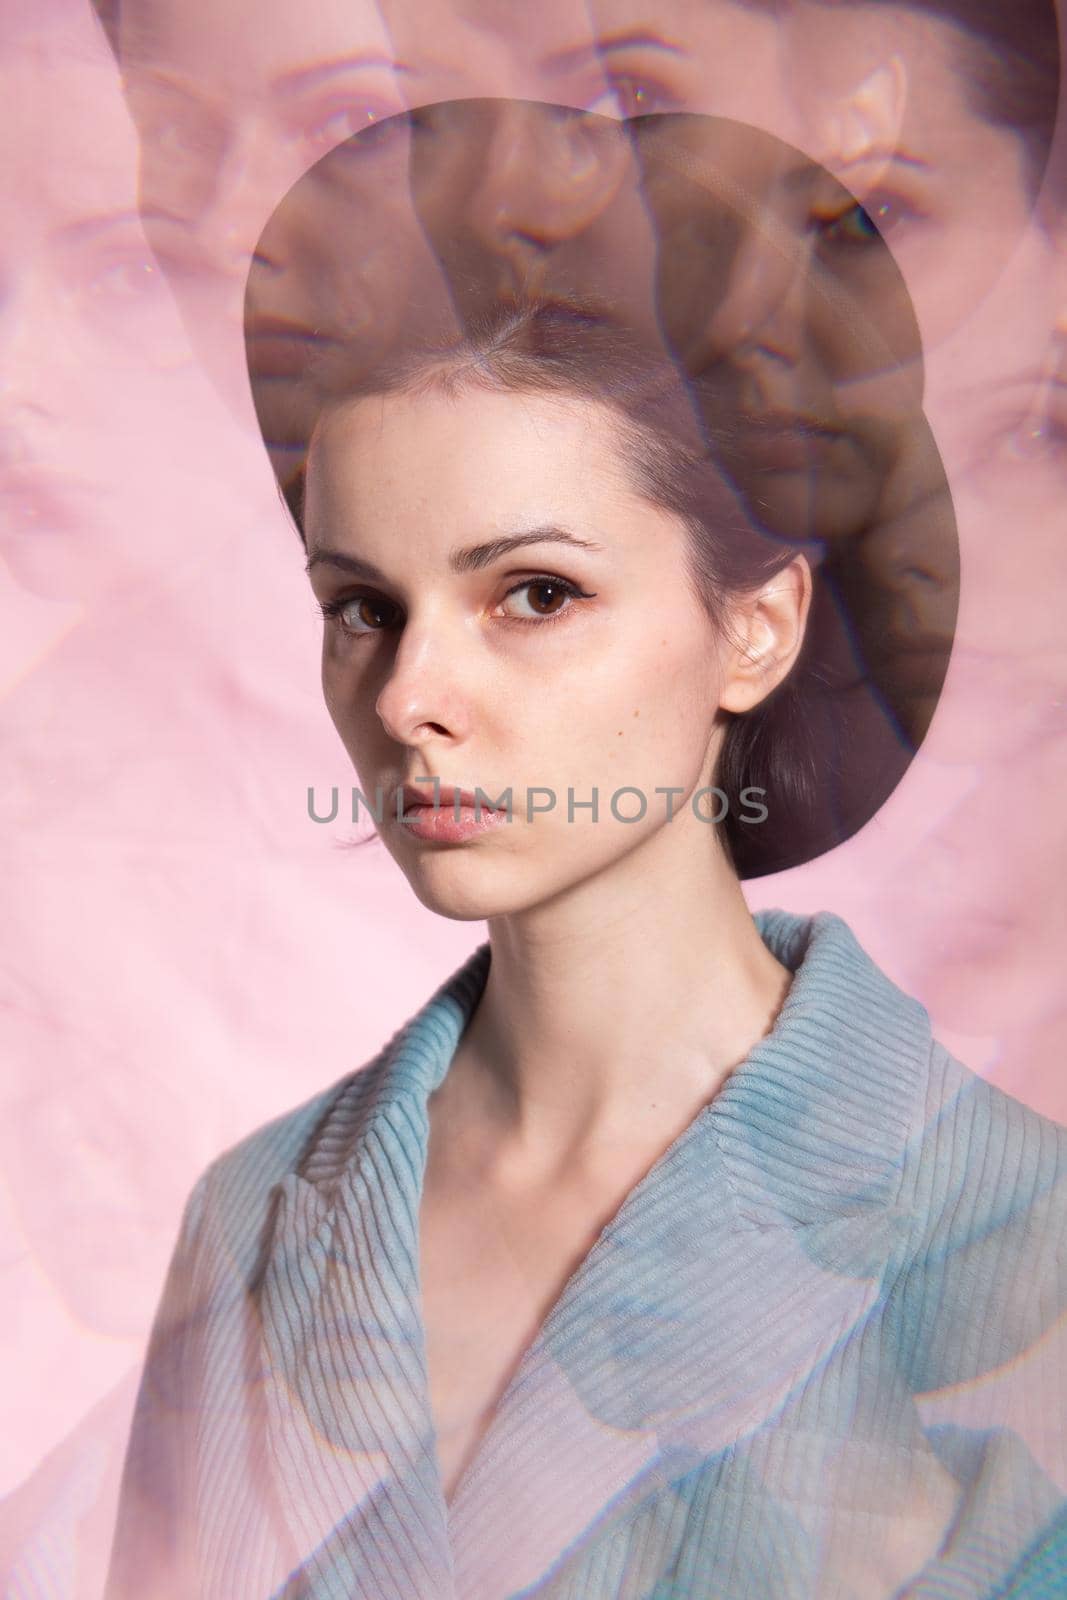 art portrait, woman in black hat and corduroy jacket. High quality photo